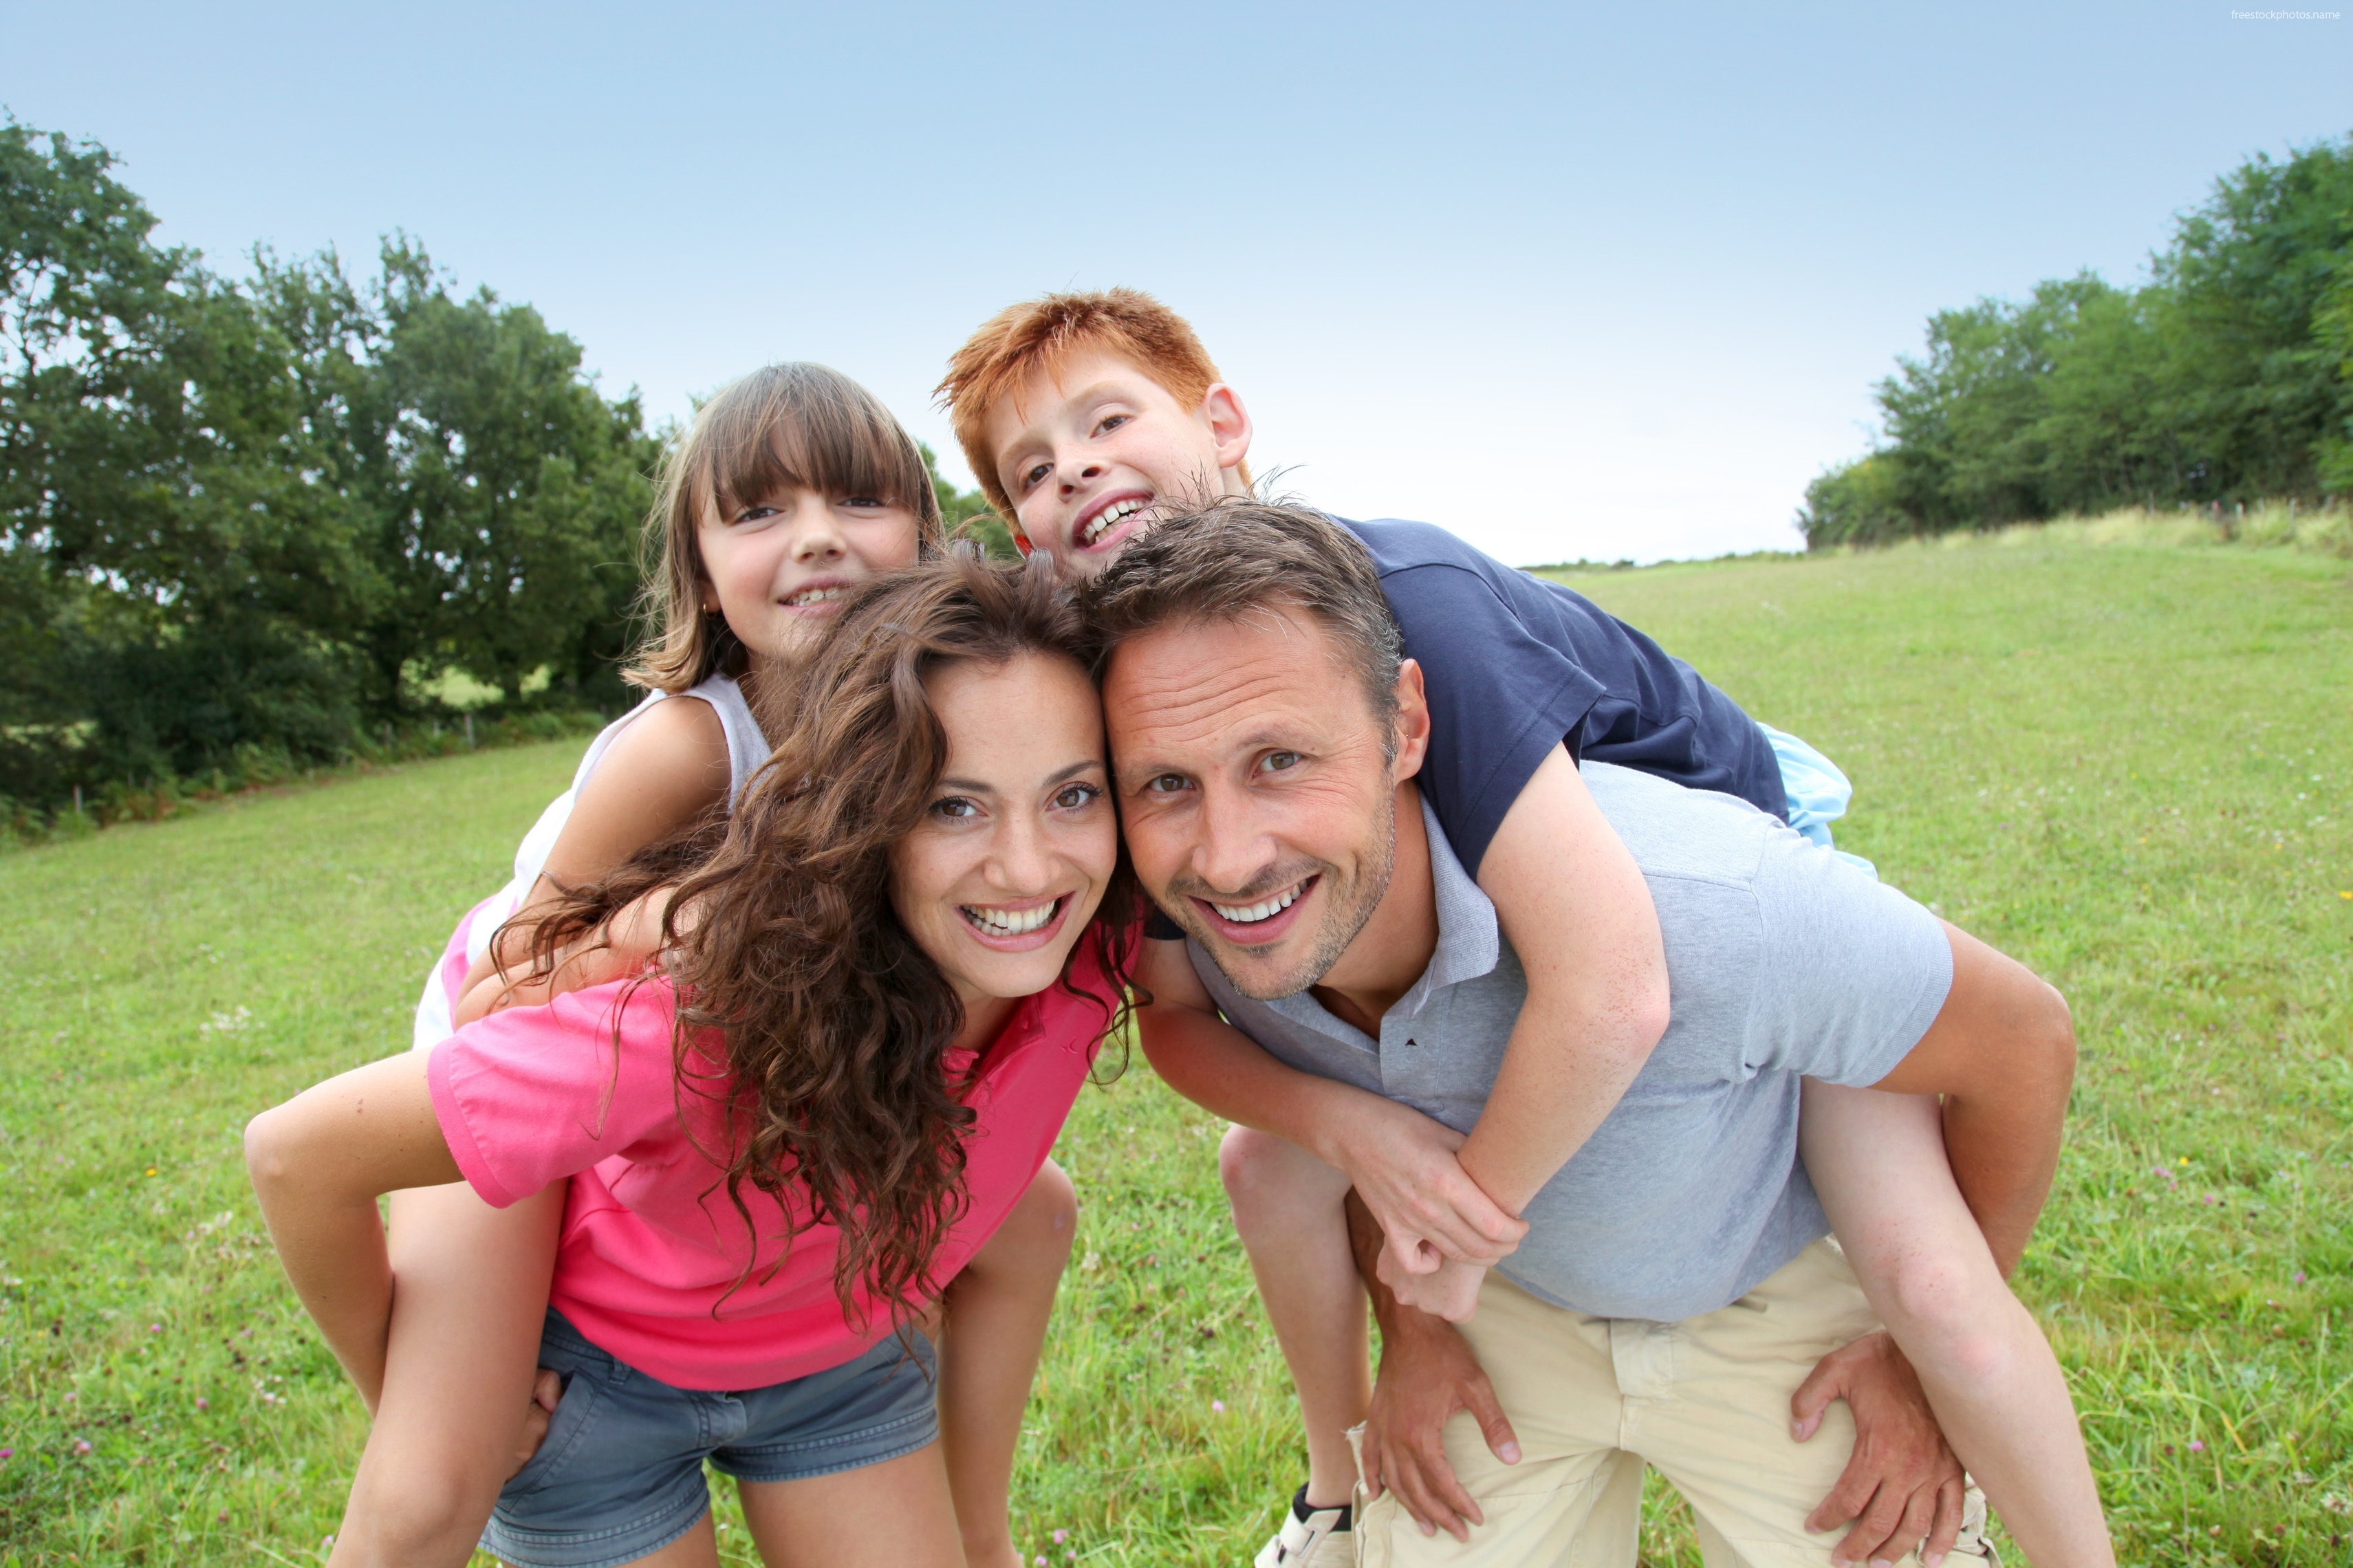 Download Stock Photos of family health images photography Royalty